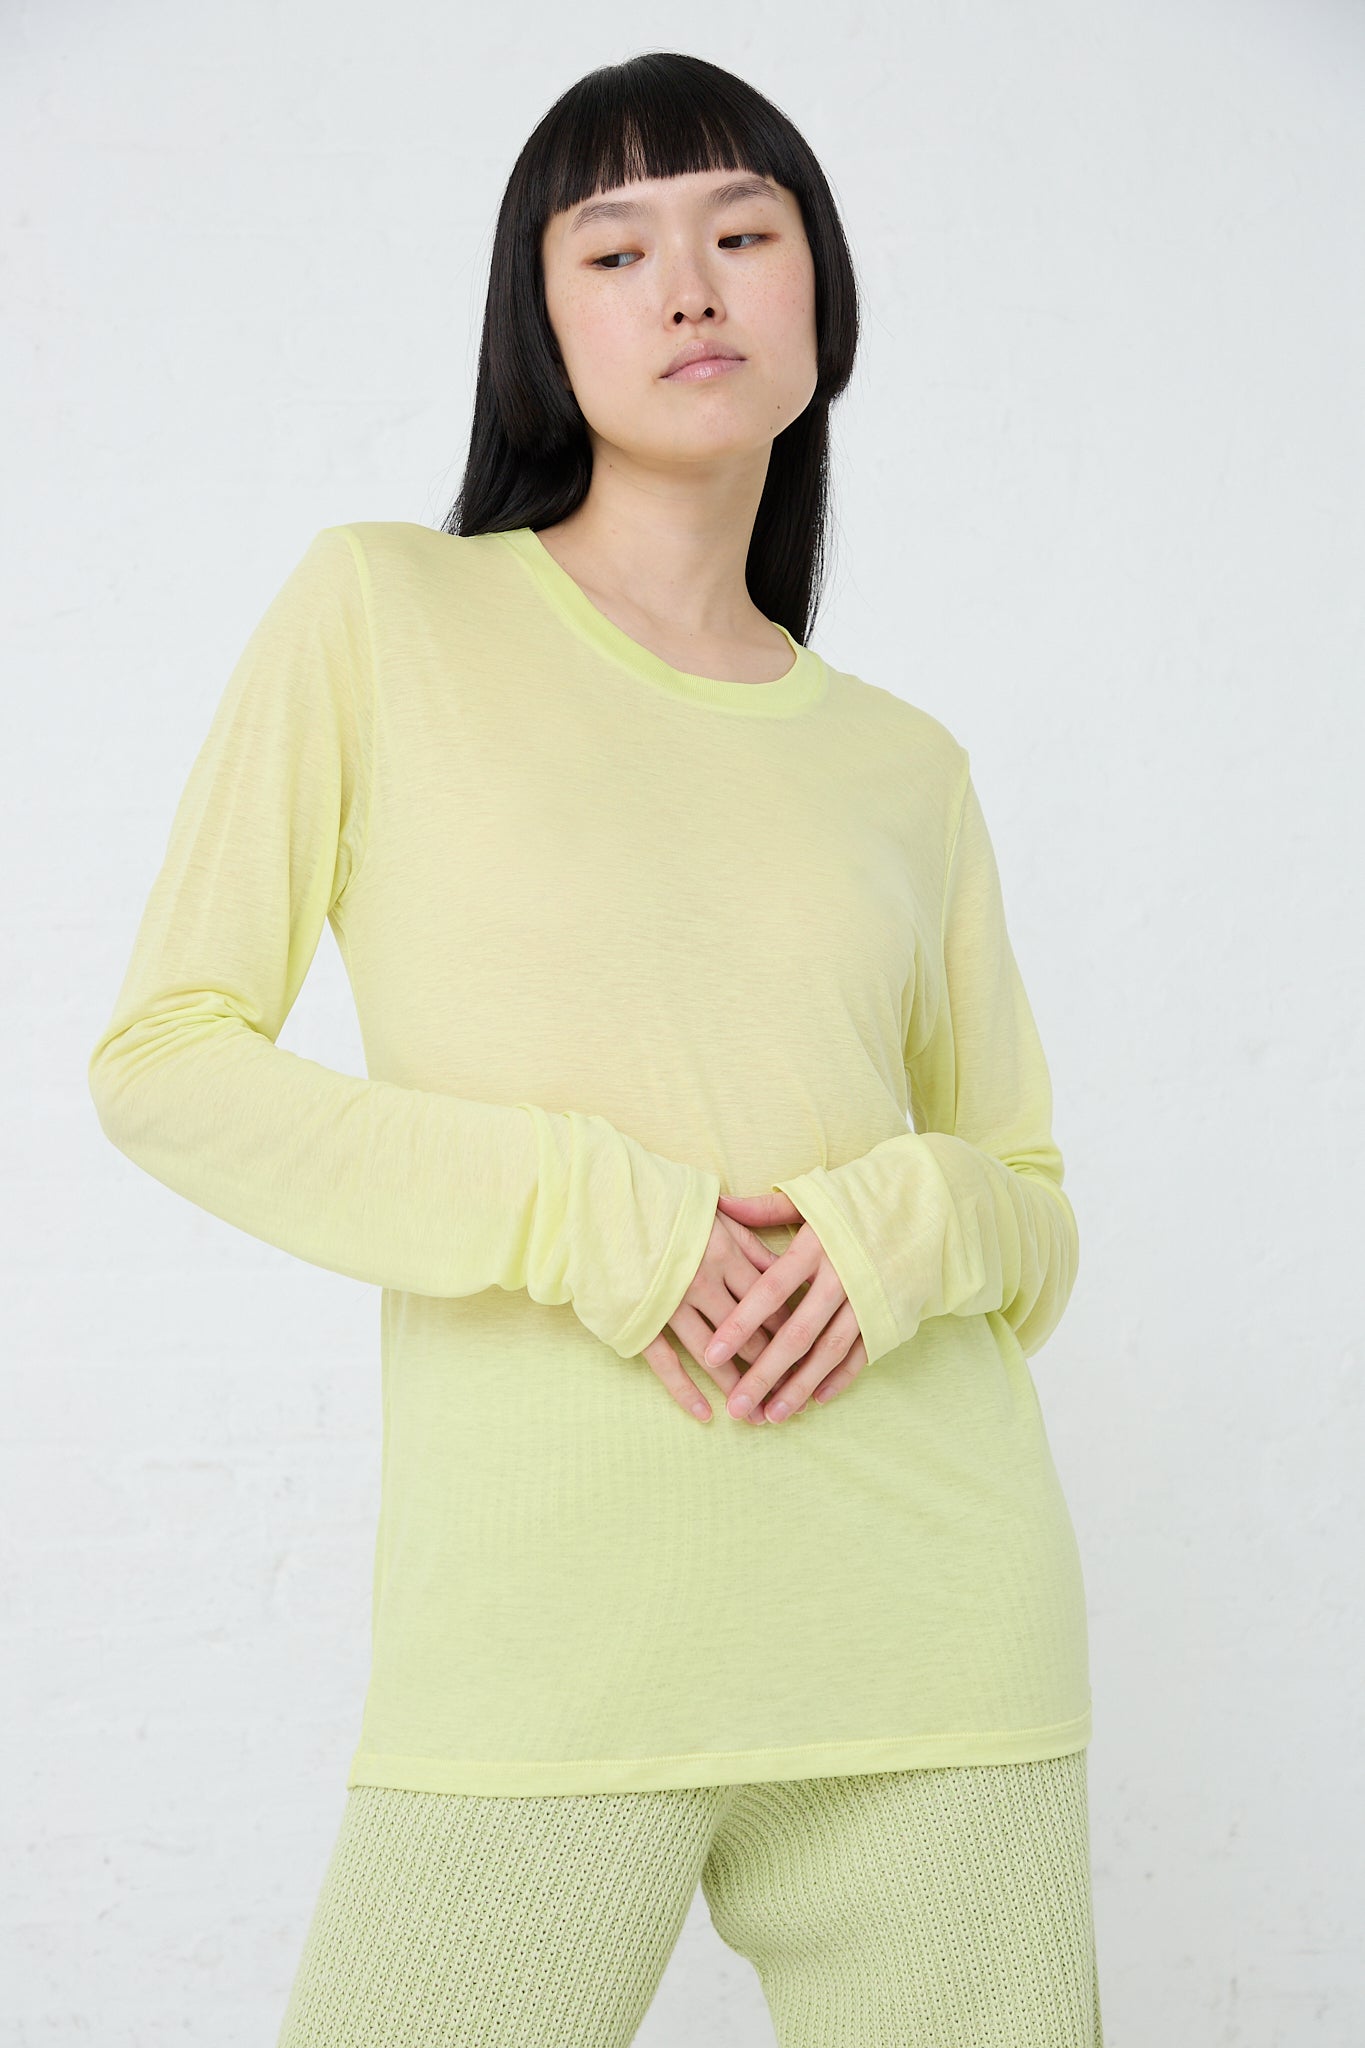 The model is wearing a Baserange Bamboo Long Sleeve Tee in Lime made of sustainable bamboo lyocell. Front view.